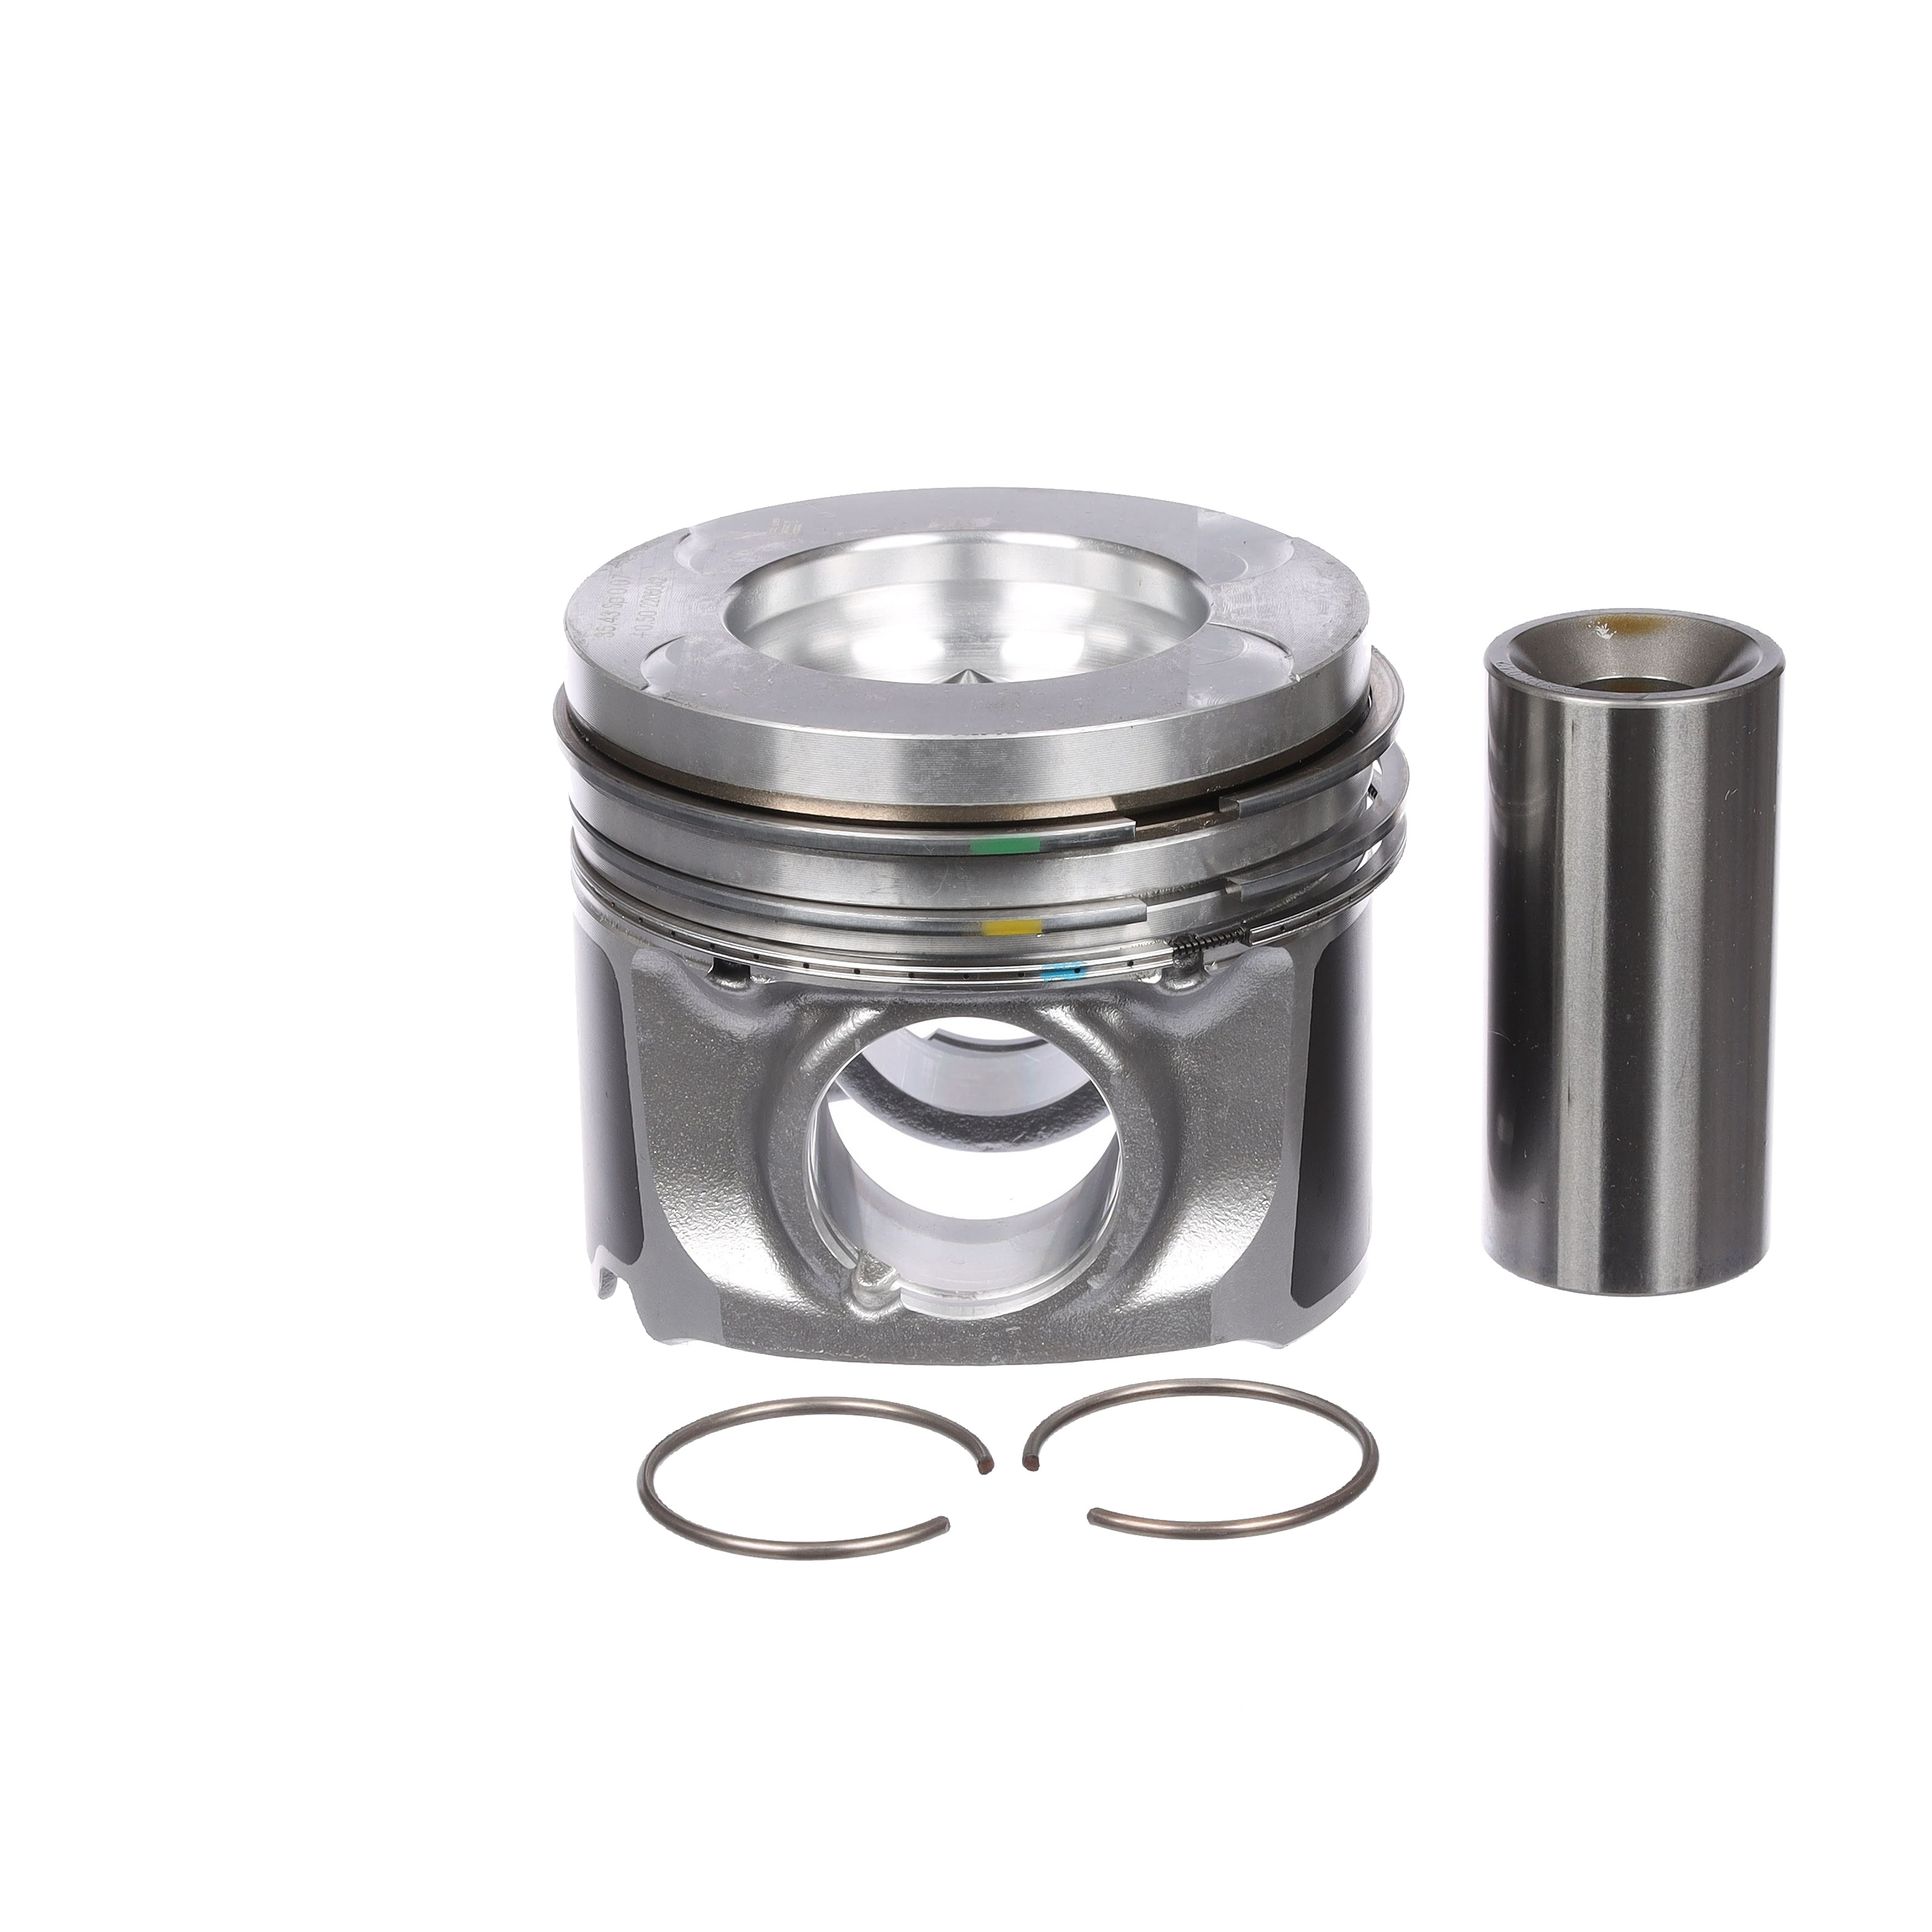 ET ENGINETEAM PM010600 Piston NISSAN experience and price